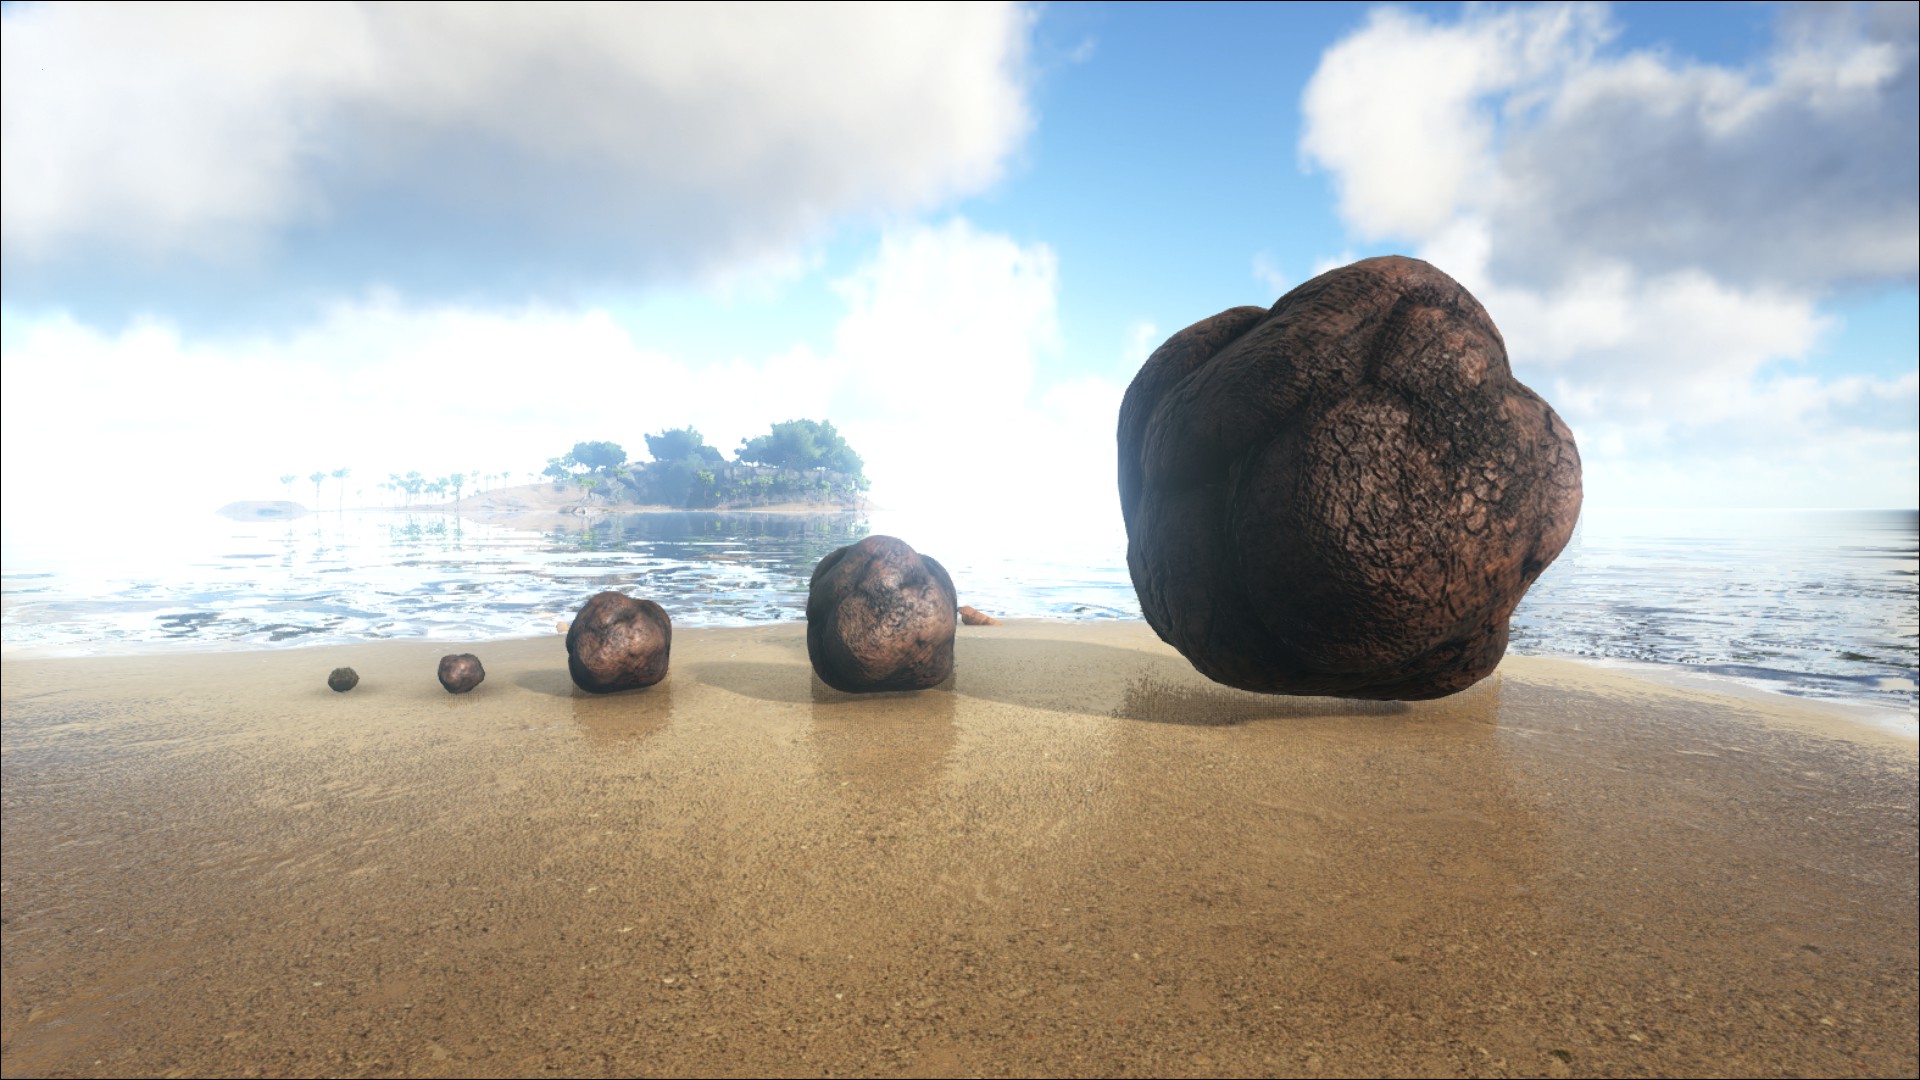 Poo: The Most Important Thing In Ark: Survival Evolved